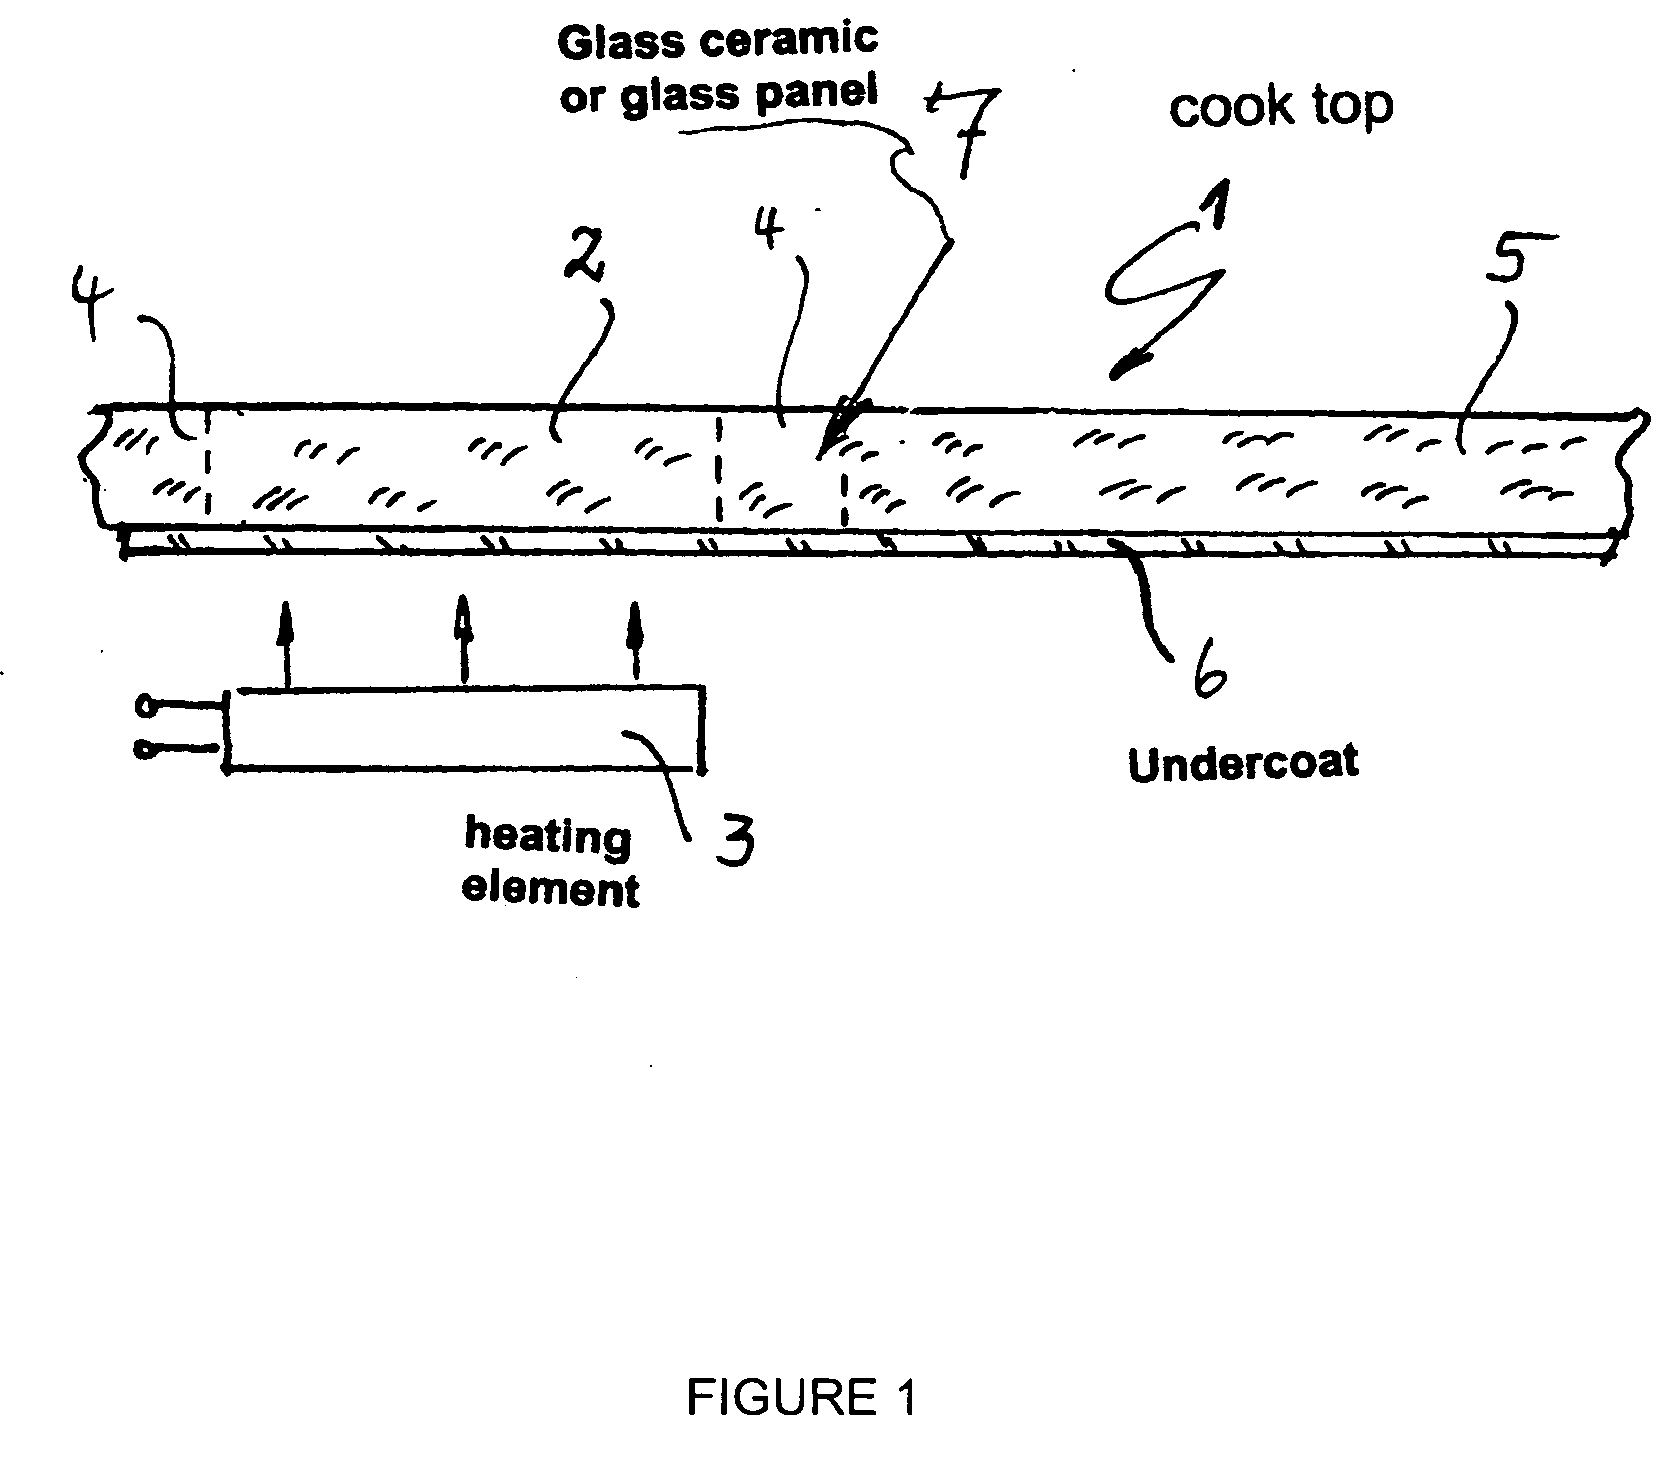 Glass ceramic or glass cook top with an IR-permeable undercoat